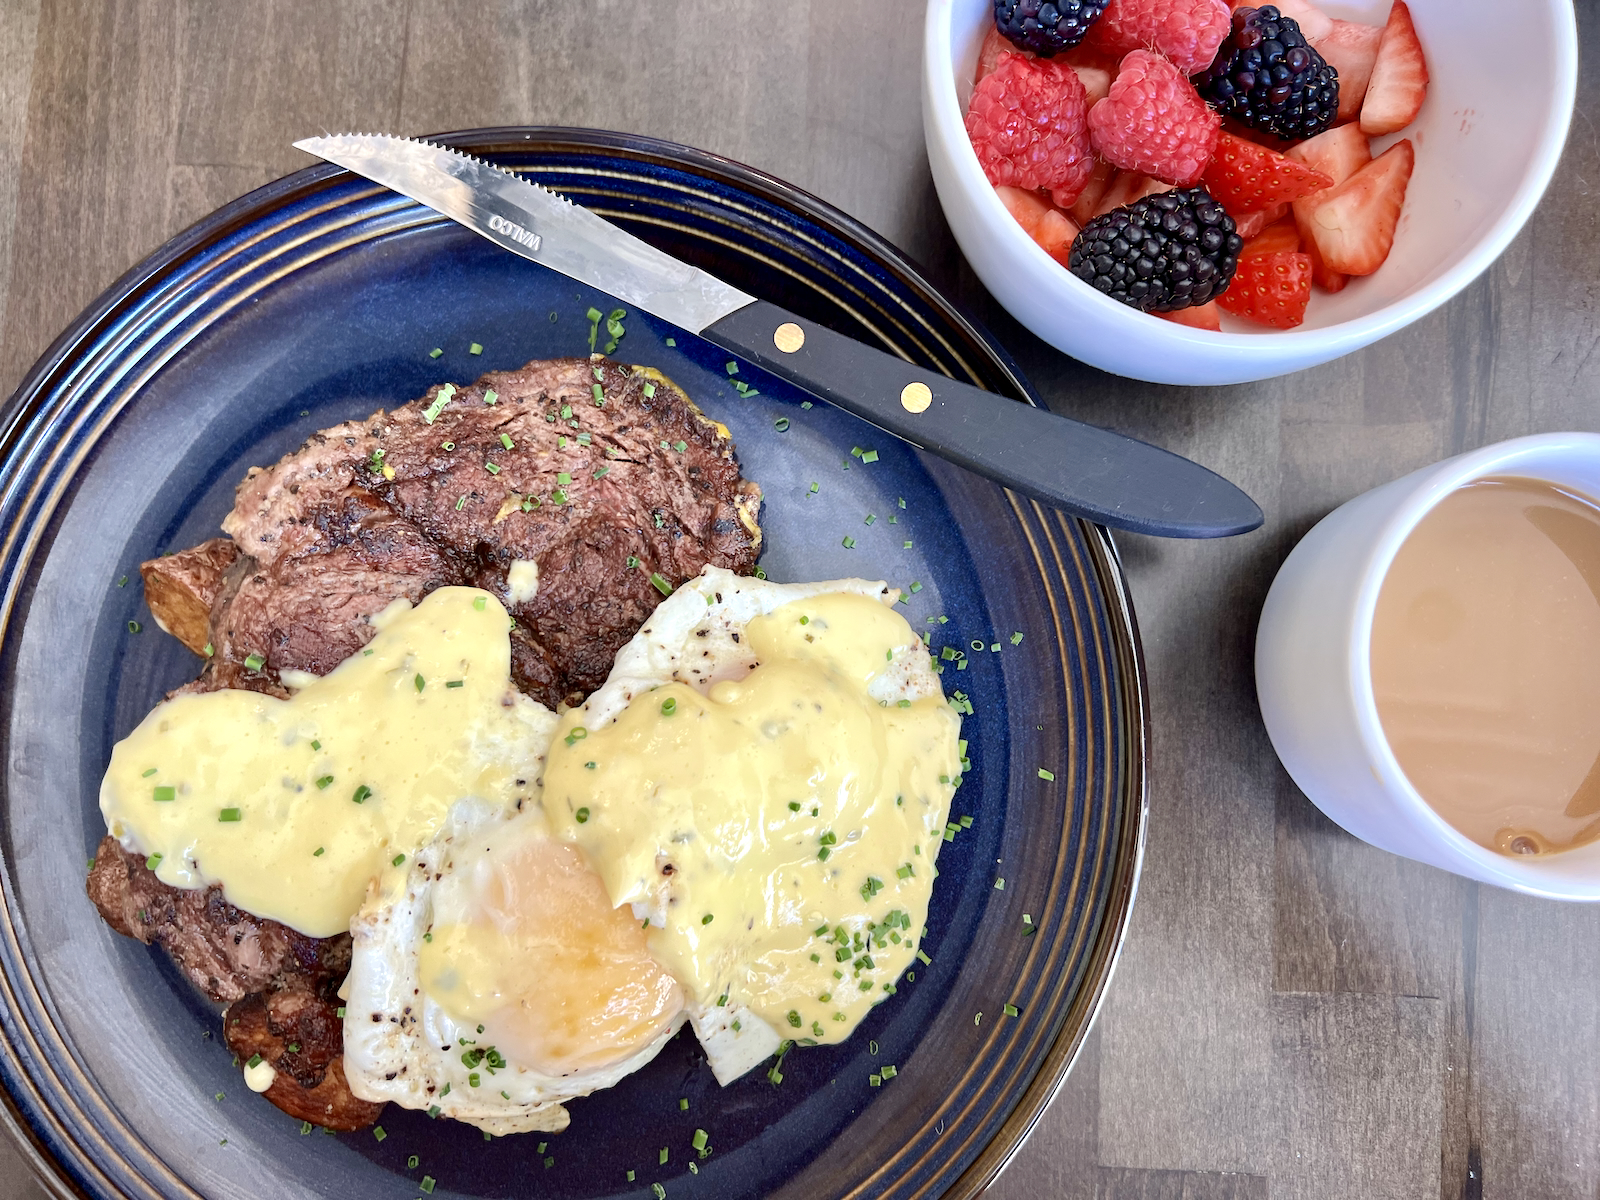 Steak and eggs at LP